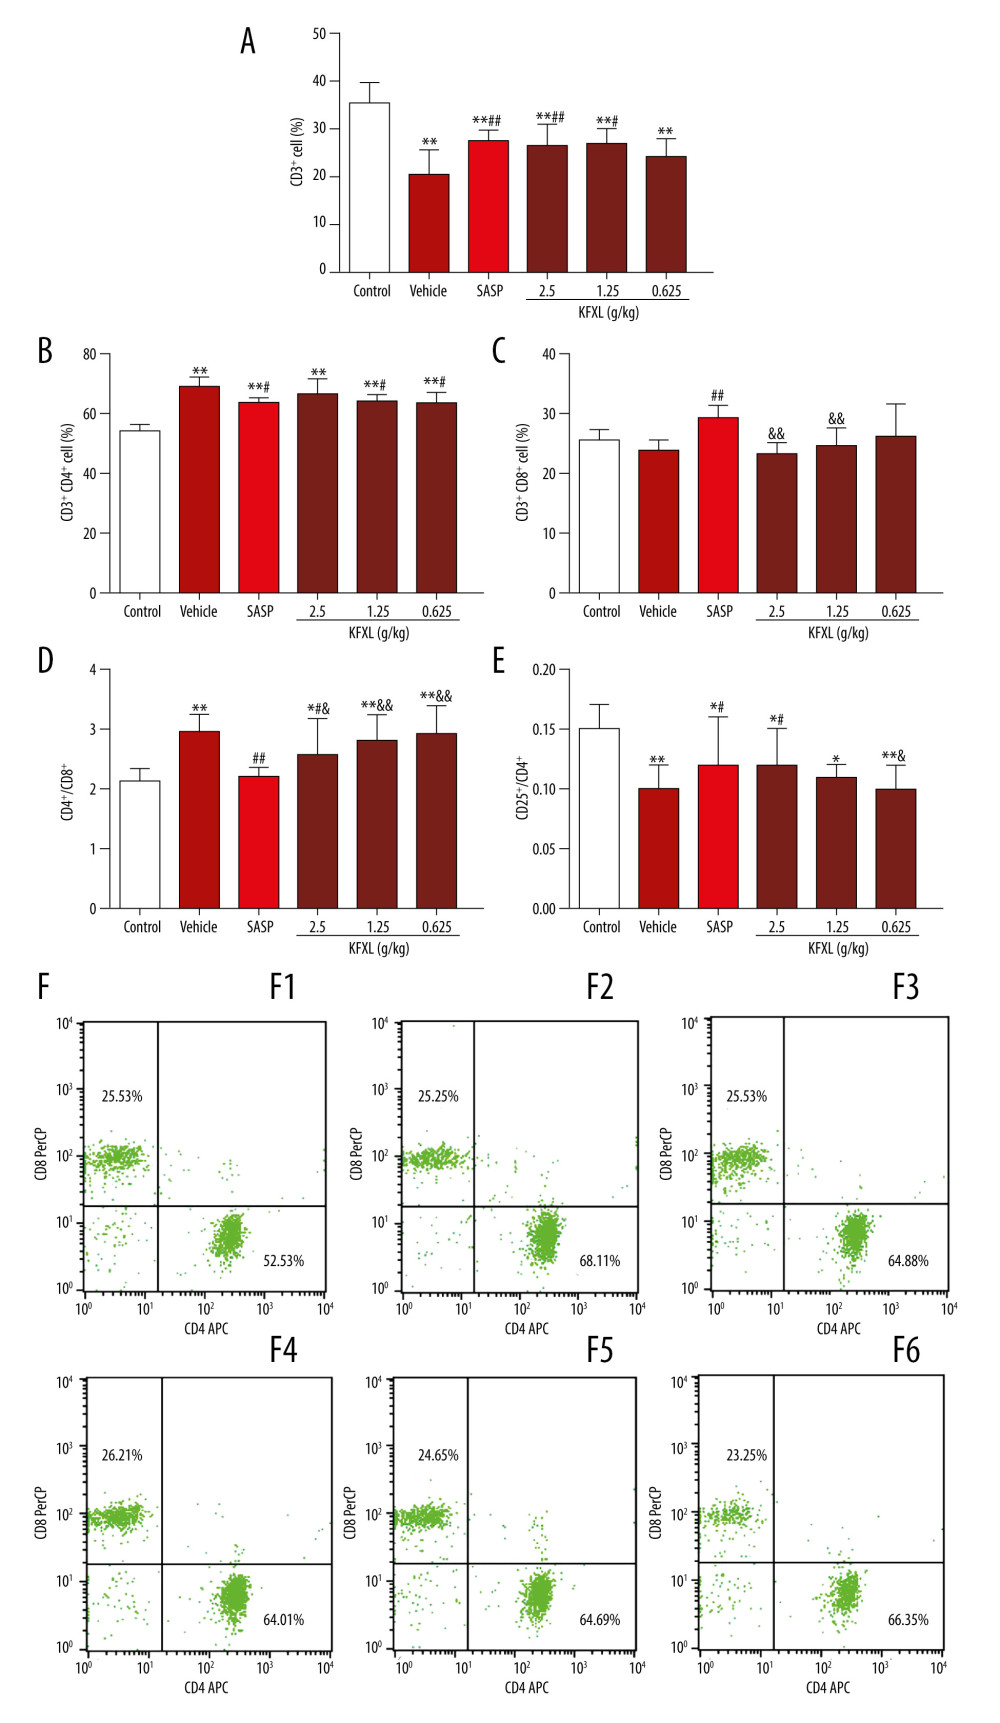 Effects of KFXL on splenic T lymphocyte subsets in acute UC mice were screened by flow cytometry for the presence of CD4 and CD8 molecules. (A) CD3+ Cell (%), (B) CD3+CD4+ Cell (%), (C) CD3+CD8+ Cell (%), (D) CD4+/CD8+, (E) CD25+/CD4+, (F) FACS Staining. FACS staining is shown different groups, including control group (F1), DSS control group (F2), SASP group (F3), KFXL 0.625 g/kg (F4), KFXL 1.25 g/kg (F5) and KFXL 2.5 g/kg (F6). * P<0.05, ** P<0.01 compared with the normal control group; # P<0.05, ## P<0.01 compared with the DSS-induced group (Vehicle); & P<0.05, && P<0.01 compared with the SASP group.